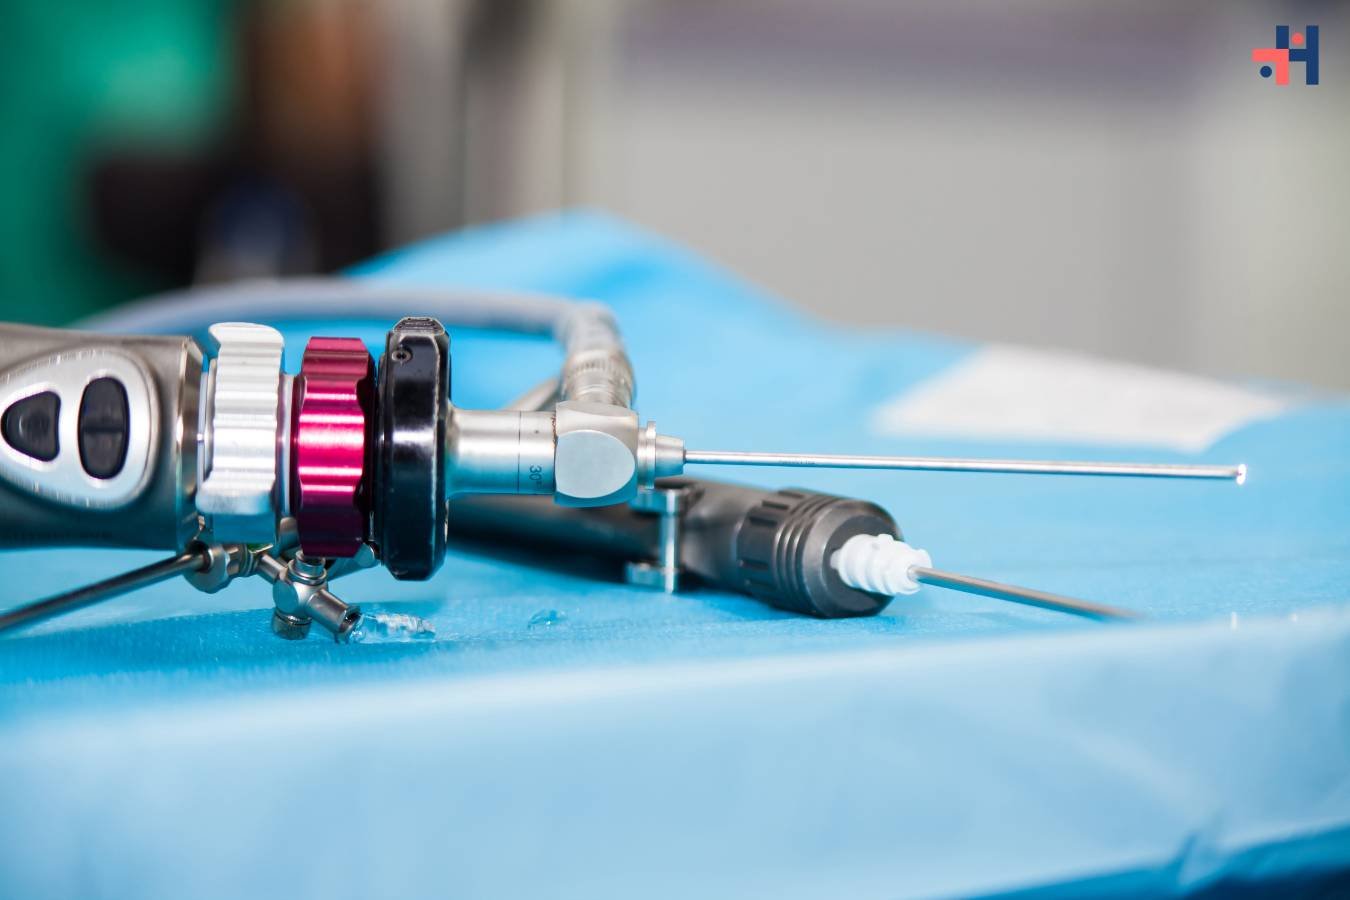 Arthroscopy Instruments: A Guide for Medical Professionals | Healthcare 360 Magazine